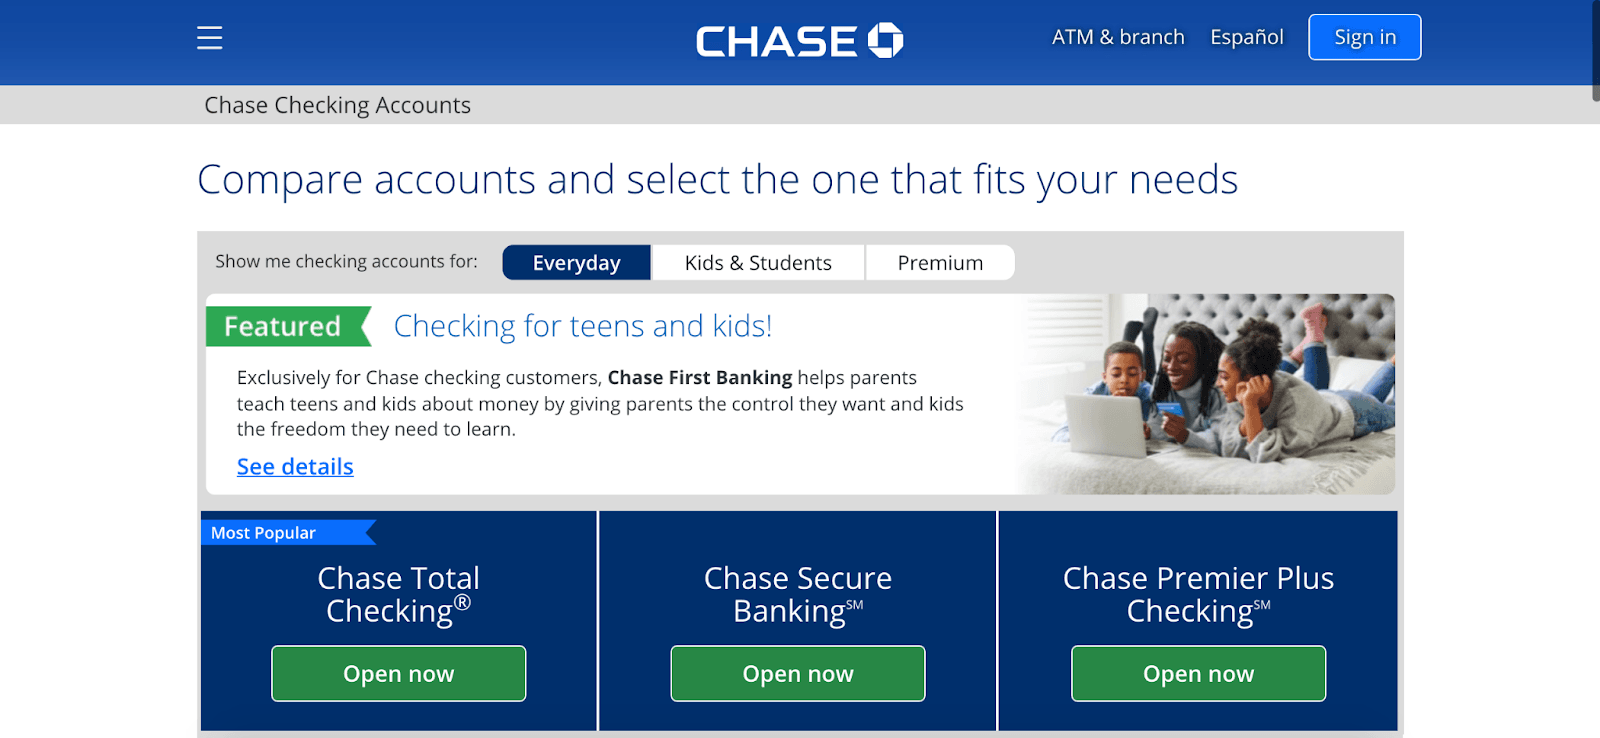 Chase Bank Review: Combining Online And Local Banking - Compare accounts